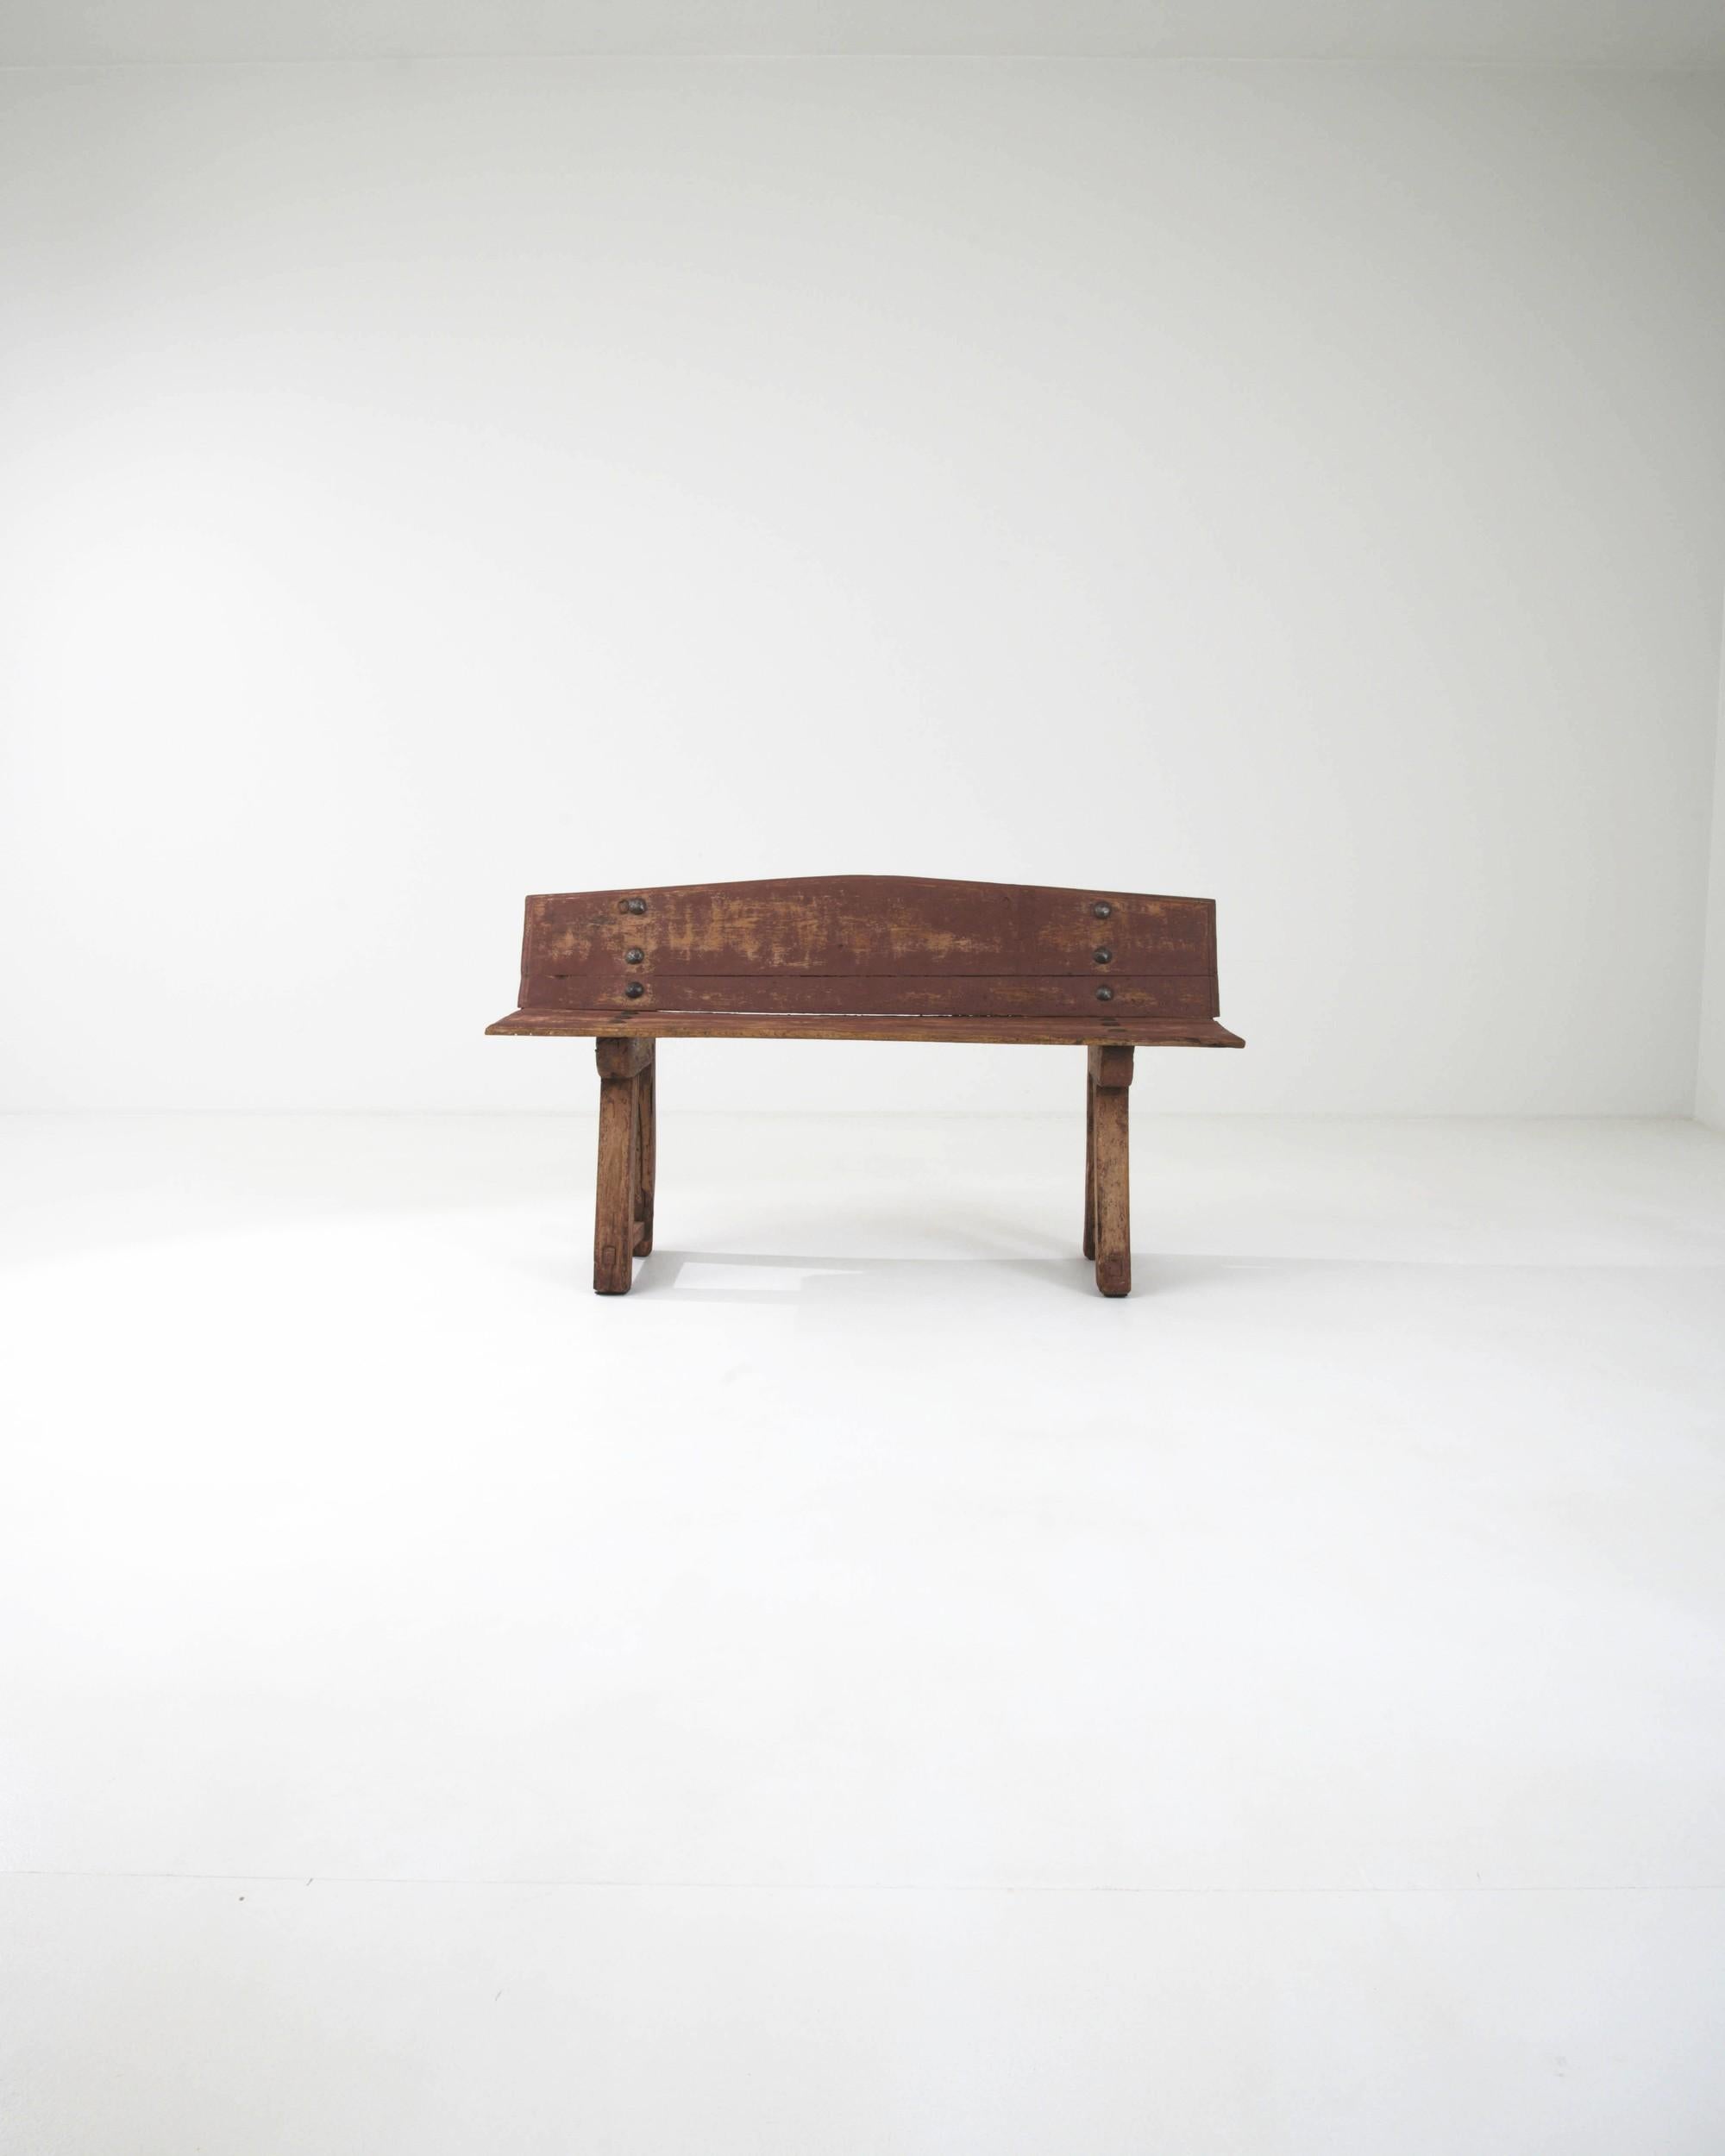 The appealing form of this rustic wooden bench gives it a timeless charm. Made in France in the early 1800s, the simple yet inviting design evokes the sunlit squares of small Provincial villages, where the townsfolk would sit to read the newspaper